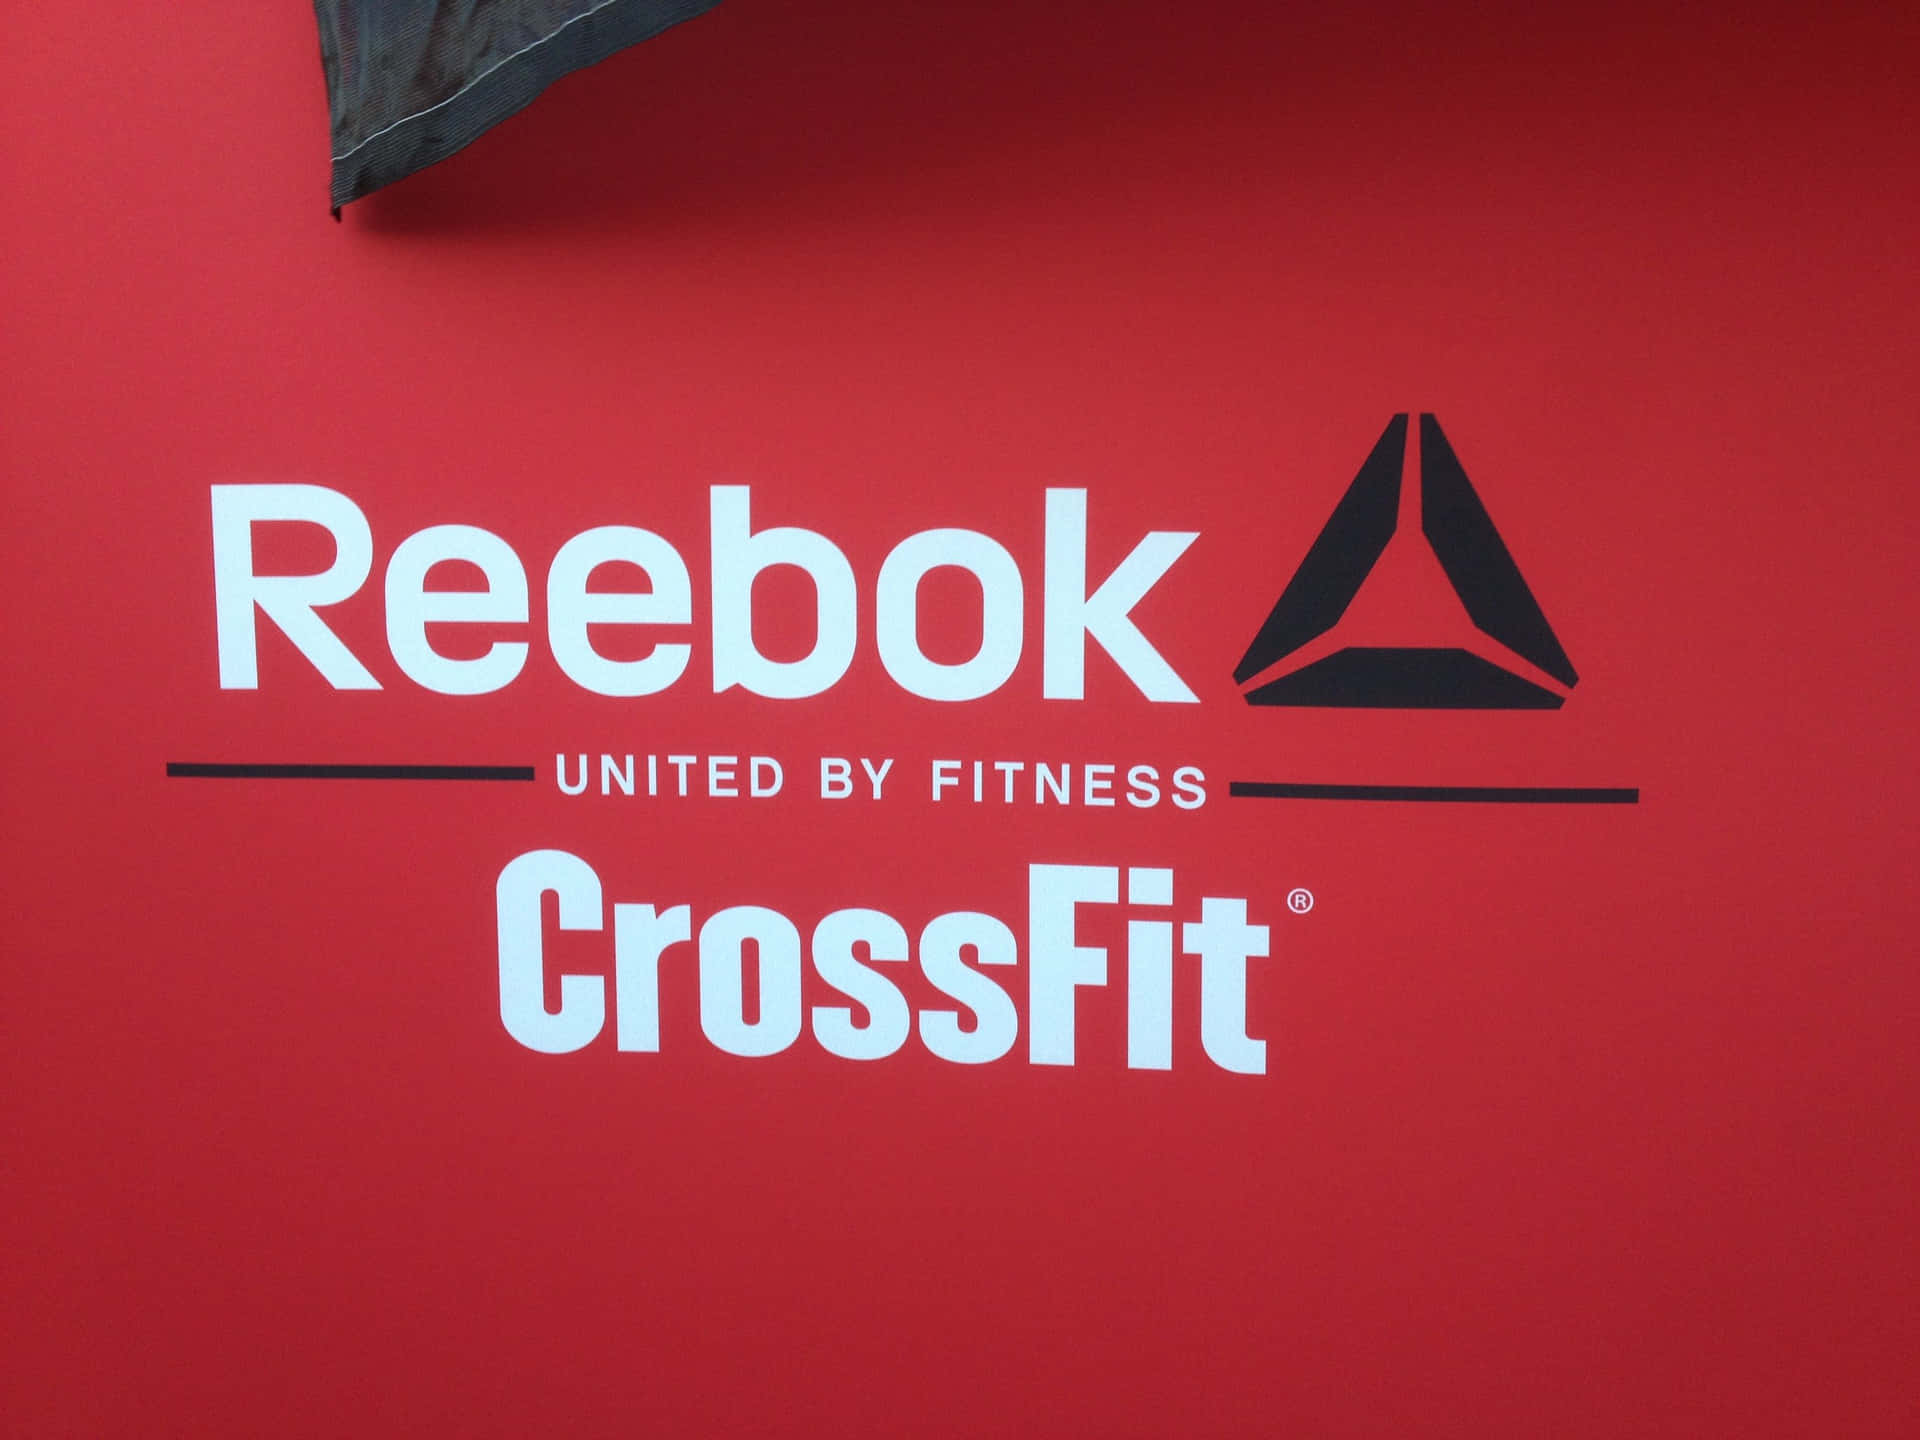 Get Ready to Step Outside of the Box with Reebok